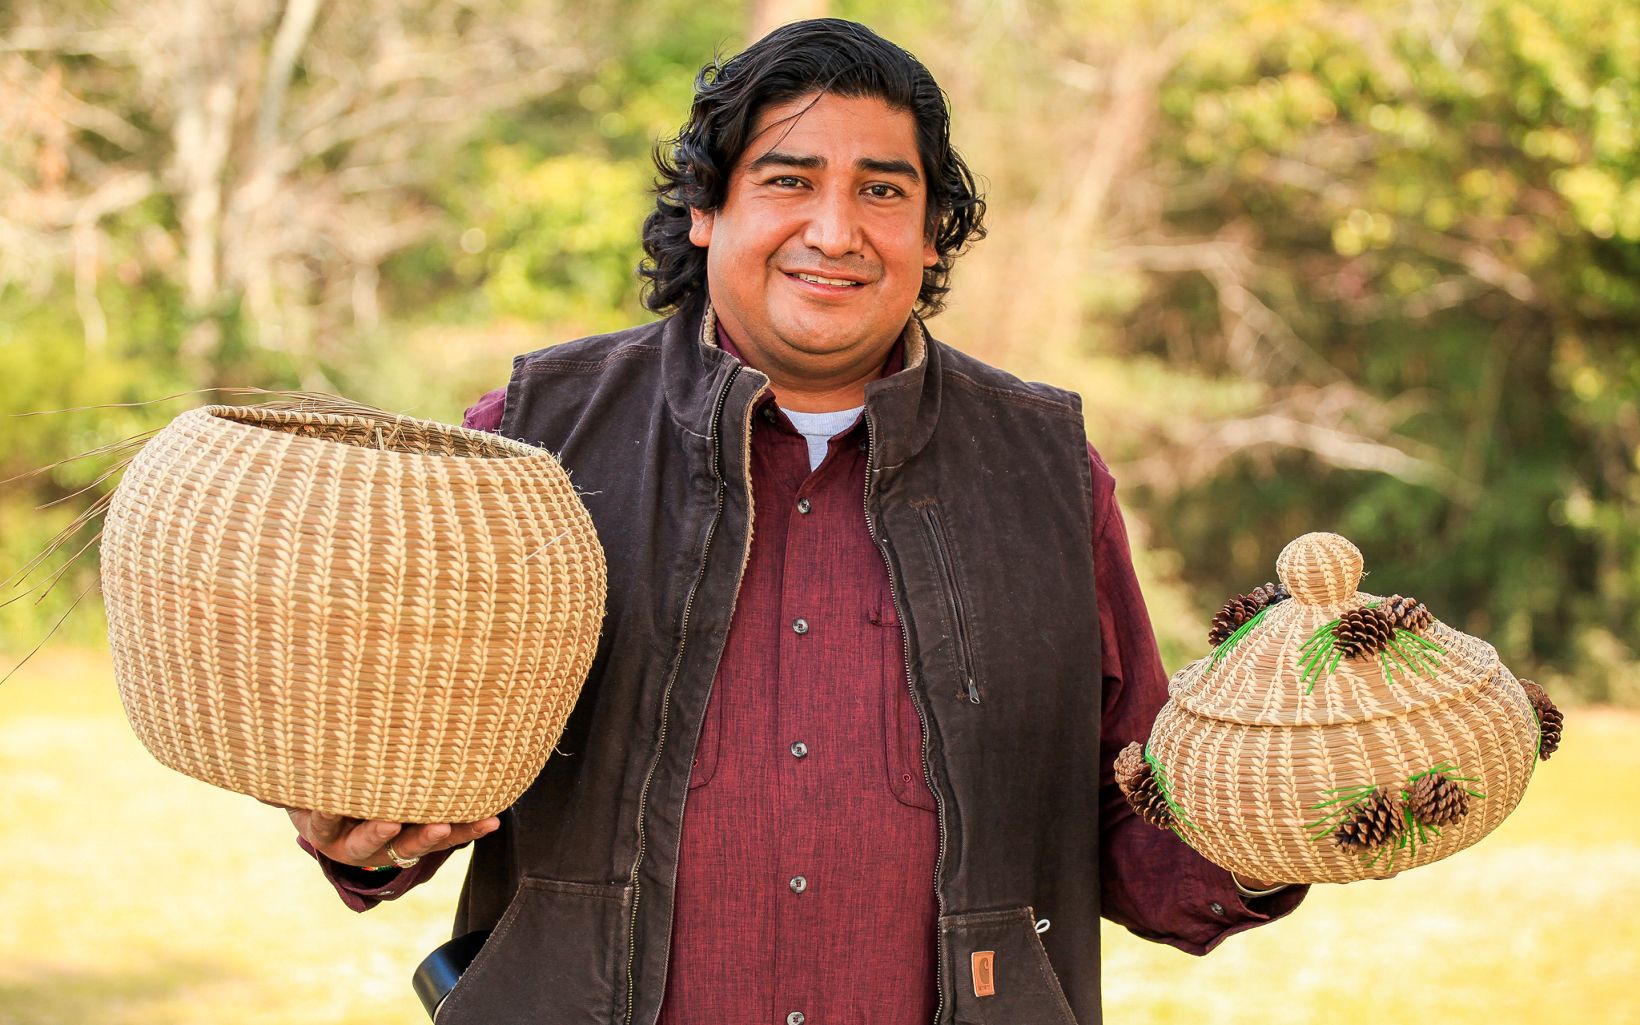 Elliott Abbey, a basket weaver of the Coushatta Tribe of Louisiana, stands outside holding brown patterned baskets, one adorned with green raffia and pinecones, in the palm of each of his hands. 